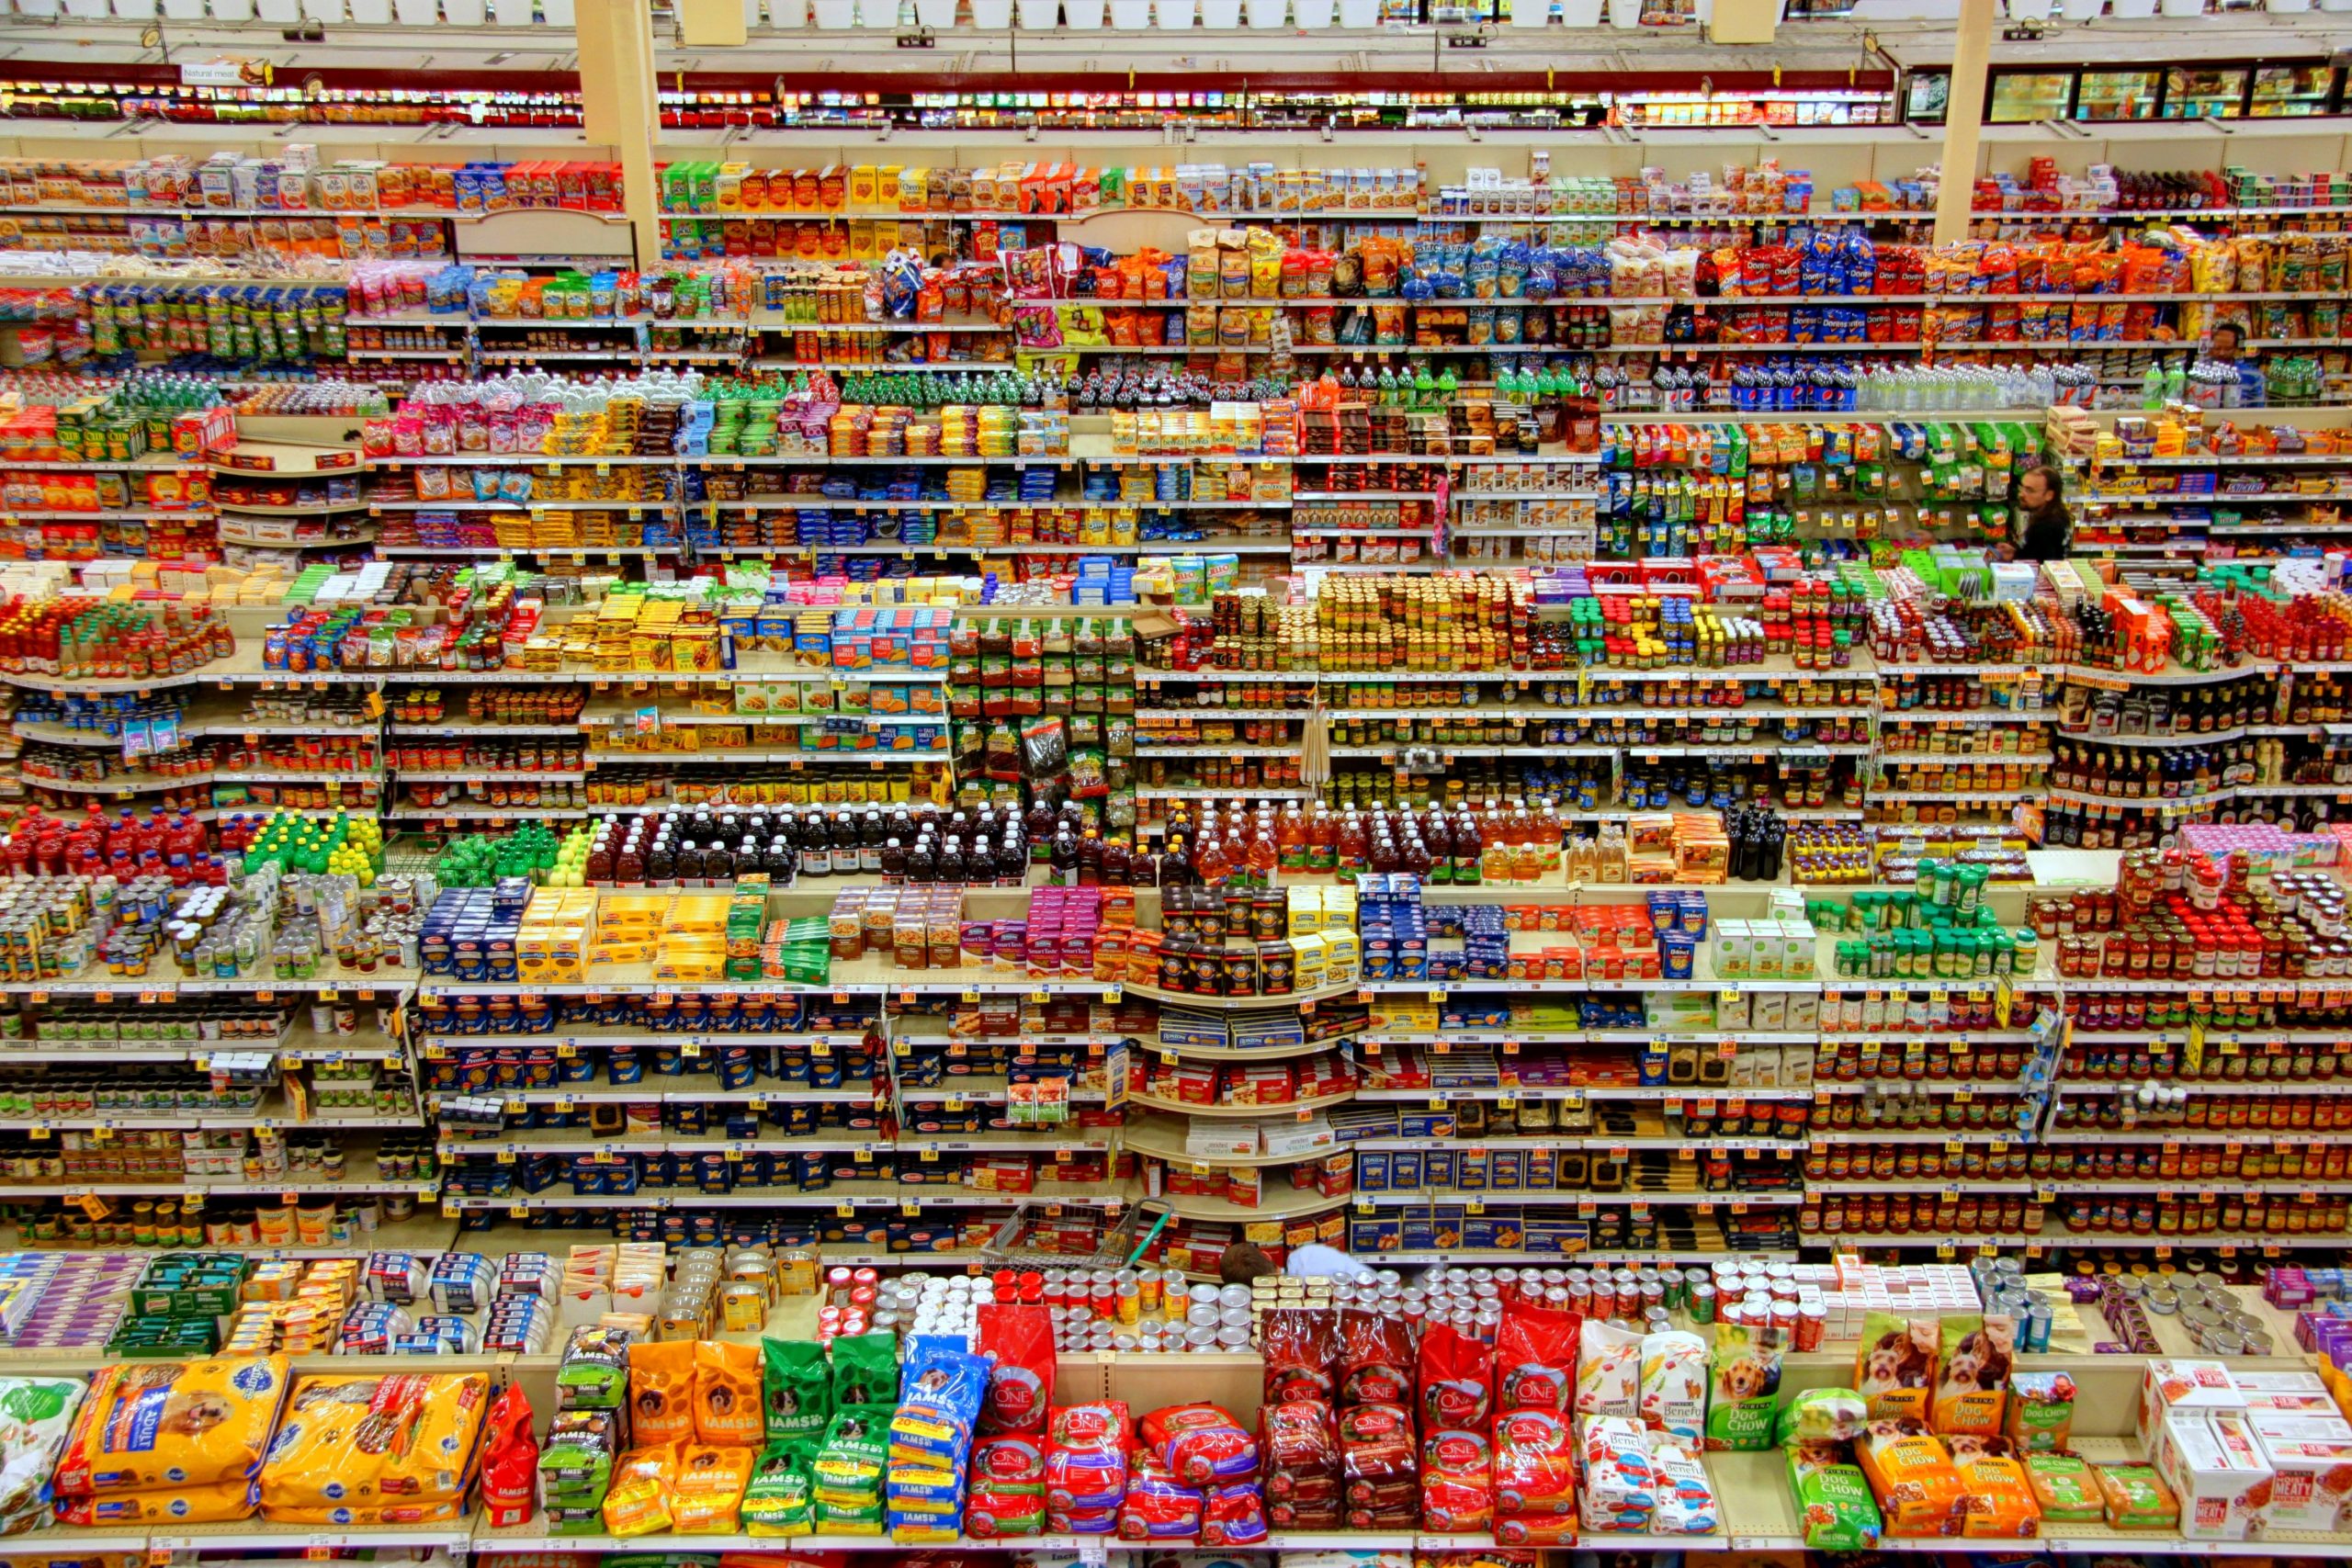 https://www.rmservicing.com/wp-content/uploads/2020/03/Crowded-Supermarket-scaled.jpg